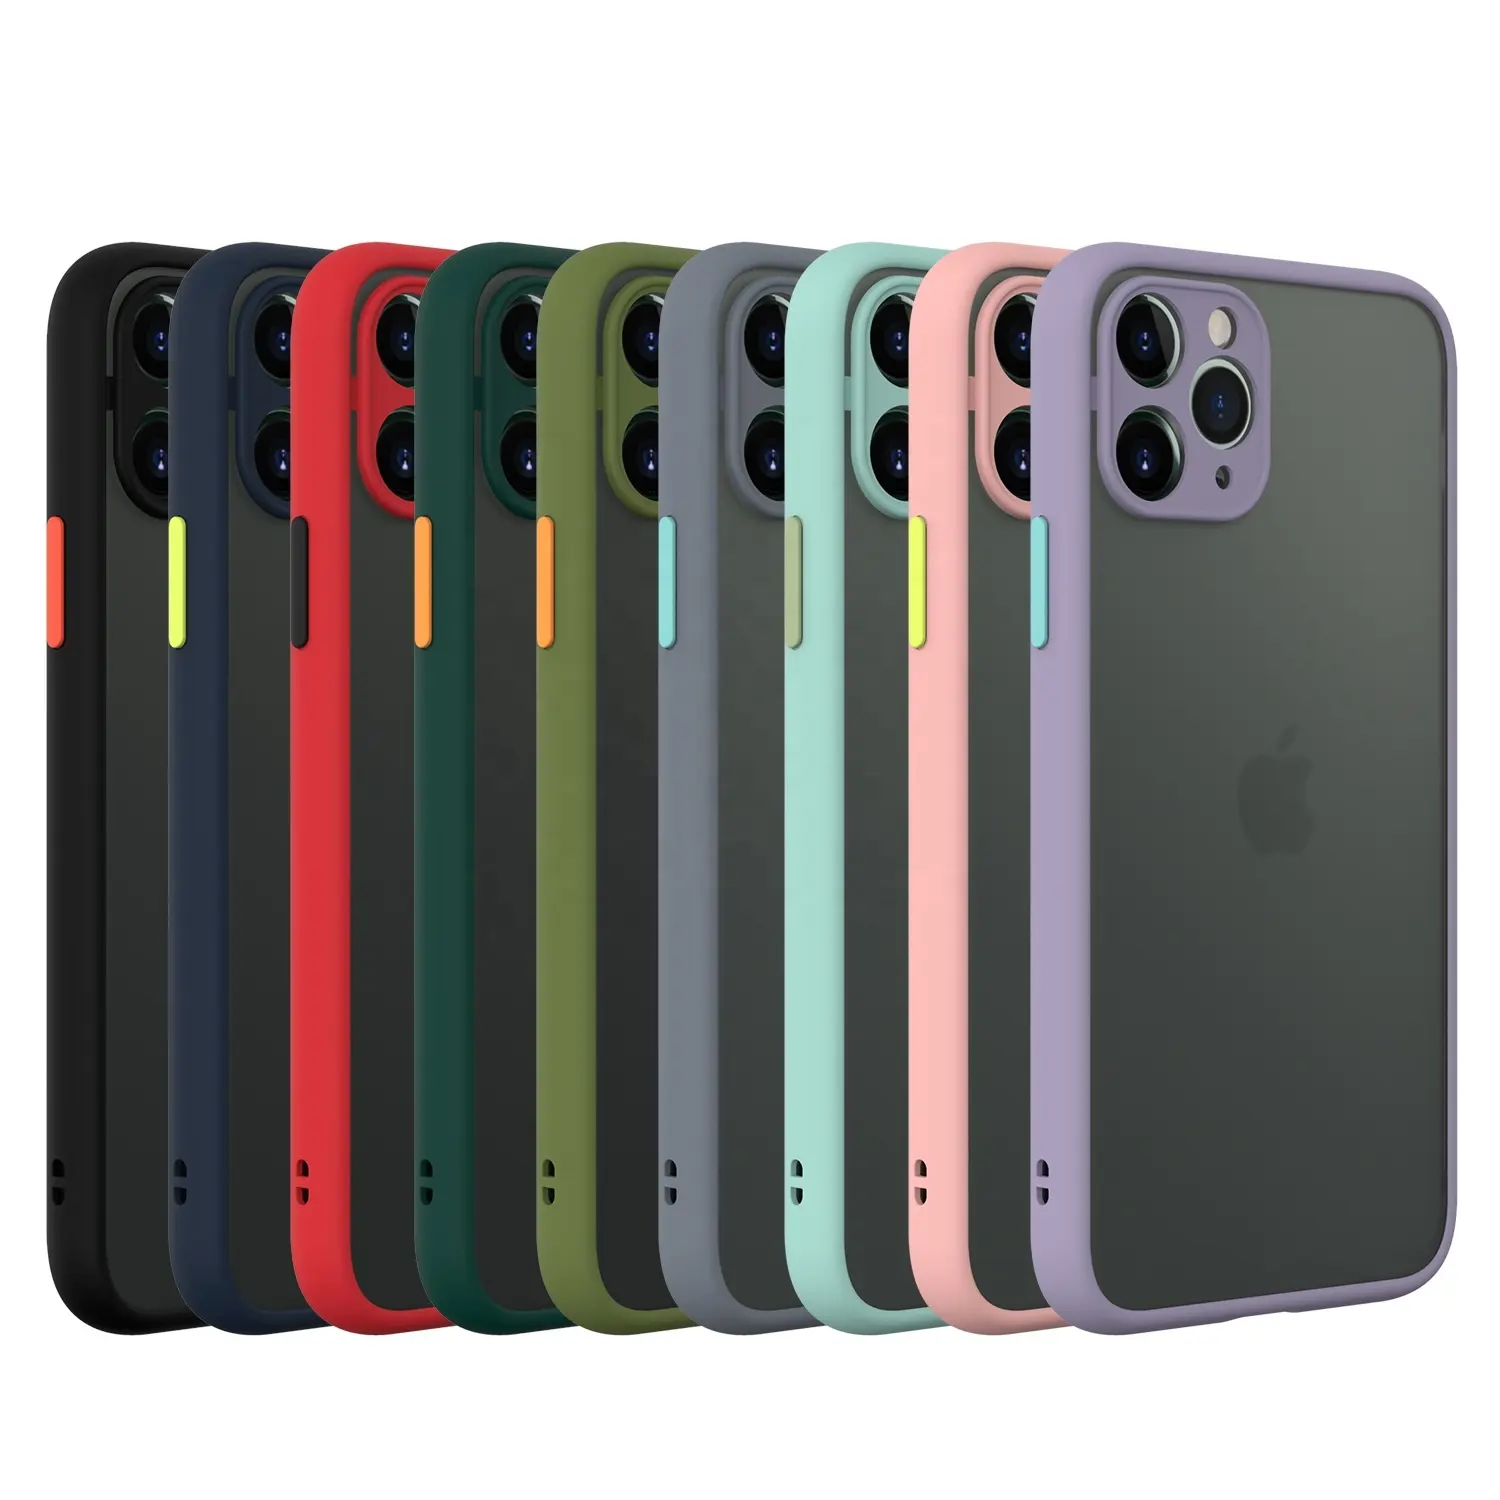 2020 Premium Matte Translucent PC Cell Phone Covers CaseとContrast ButtonためApple iPhone 11 Pro Max XS XR X 9 8 Plus 7 SE